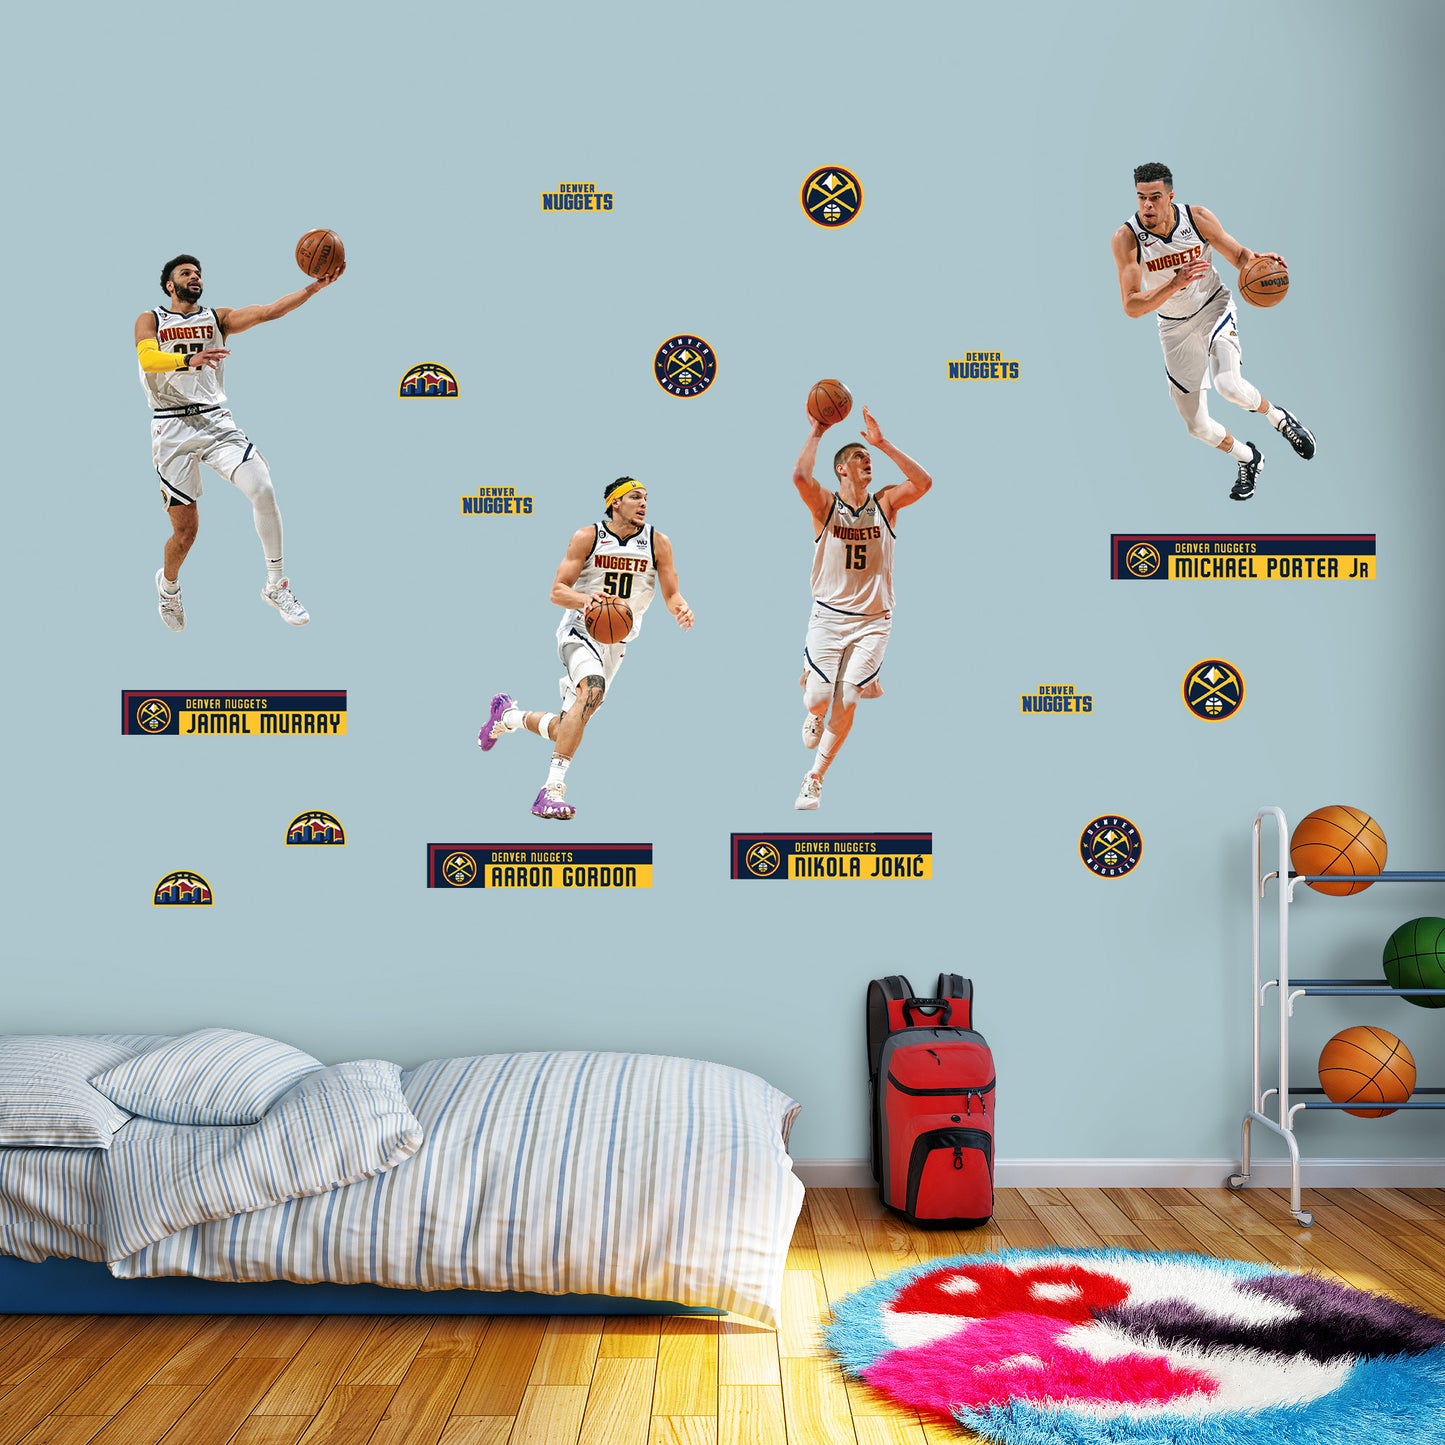 Denver Nuggets: Nikola Jokić, Jamal Murray, Aaron Gordon and Michael Porter Jr.  Team Collection        - Officially Licensed NBA Removable     Adhesive Decal